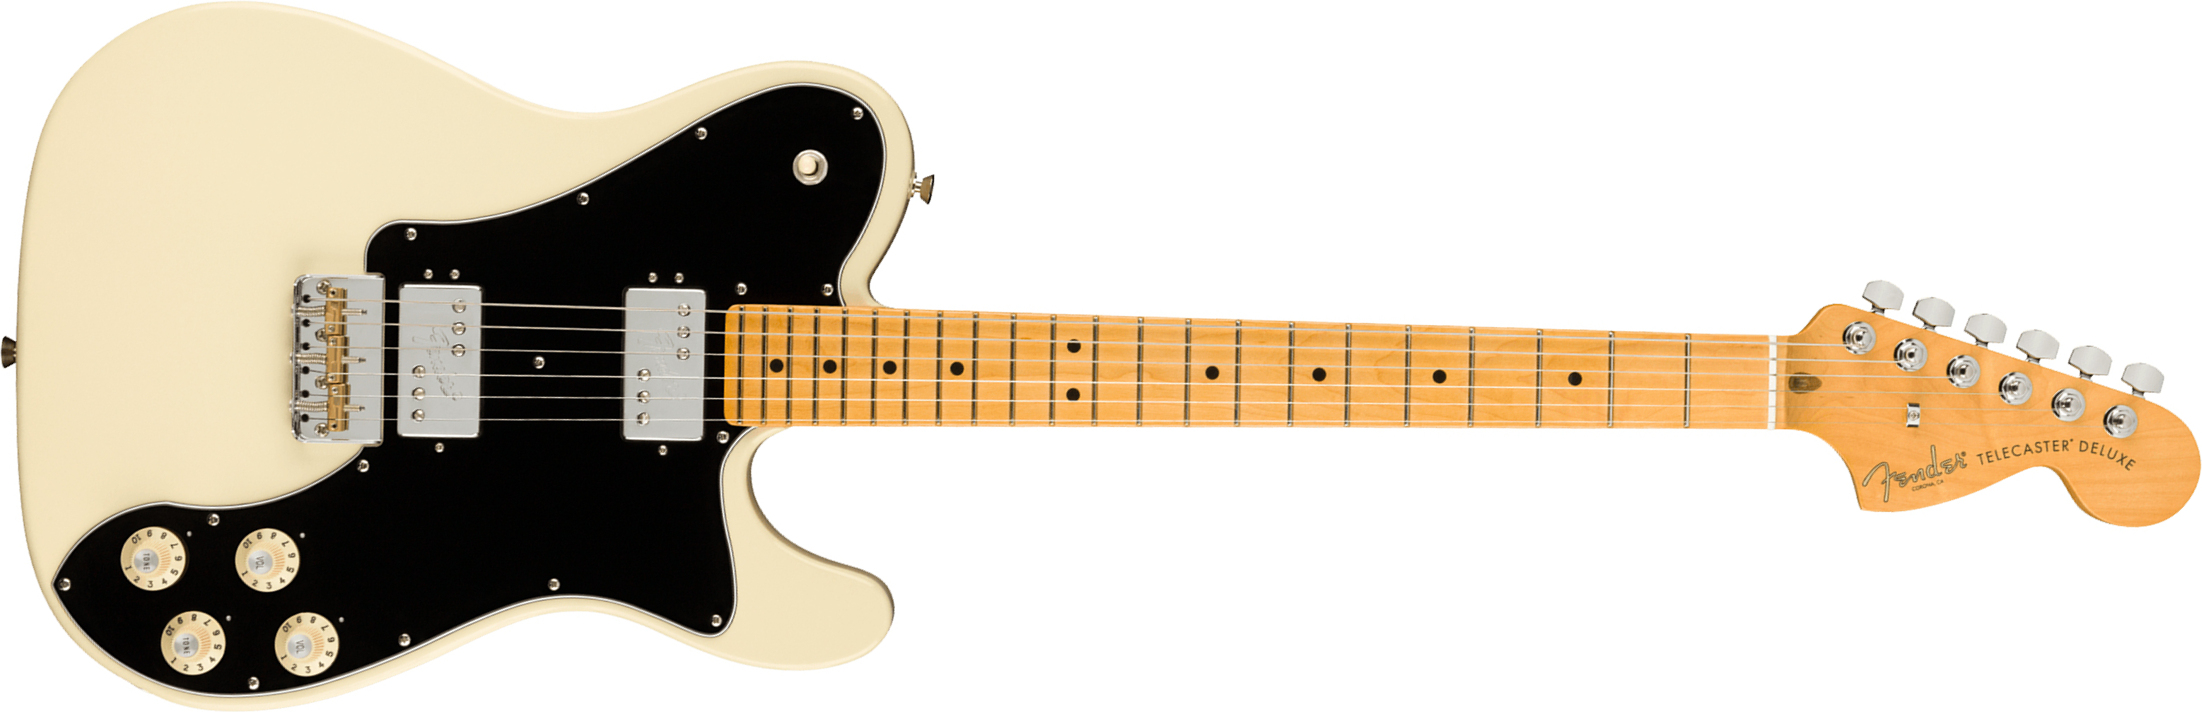 Fender Tele Deluxe American Professional Ii Usa Mn - Olympic White - Tel shape electric guitar - Main picture